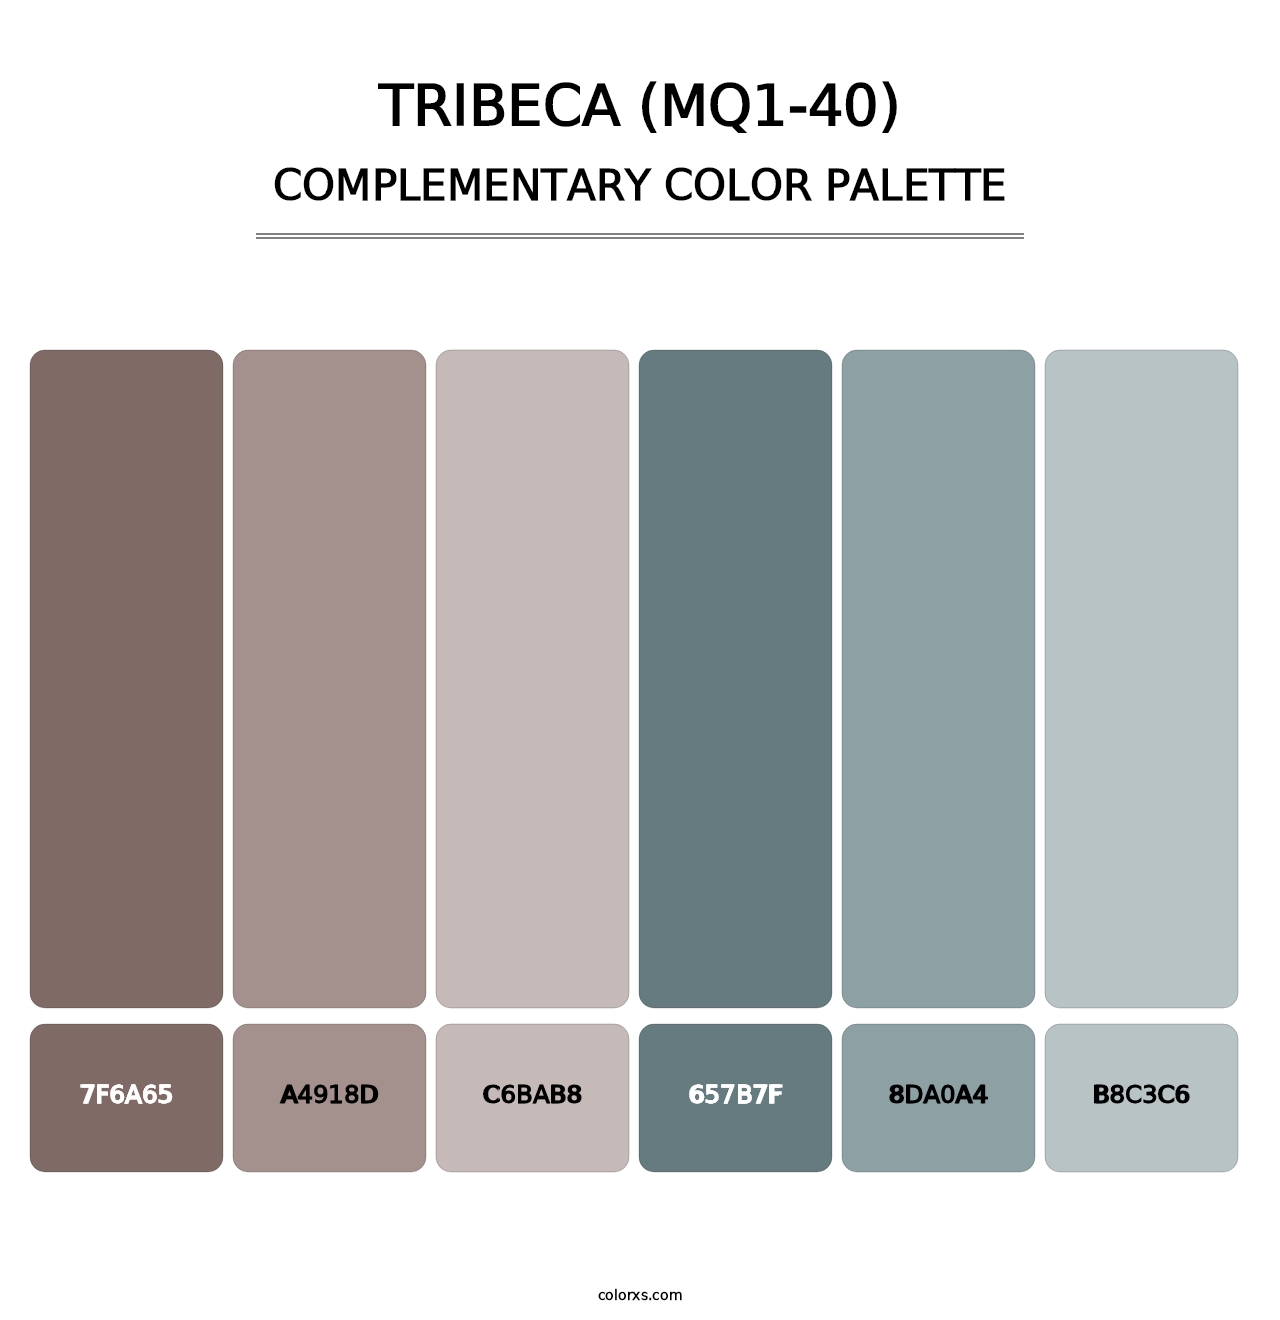 Tribeca (MQ1-40) - Complementary Color Palette